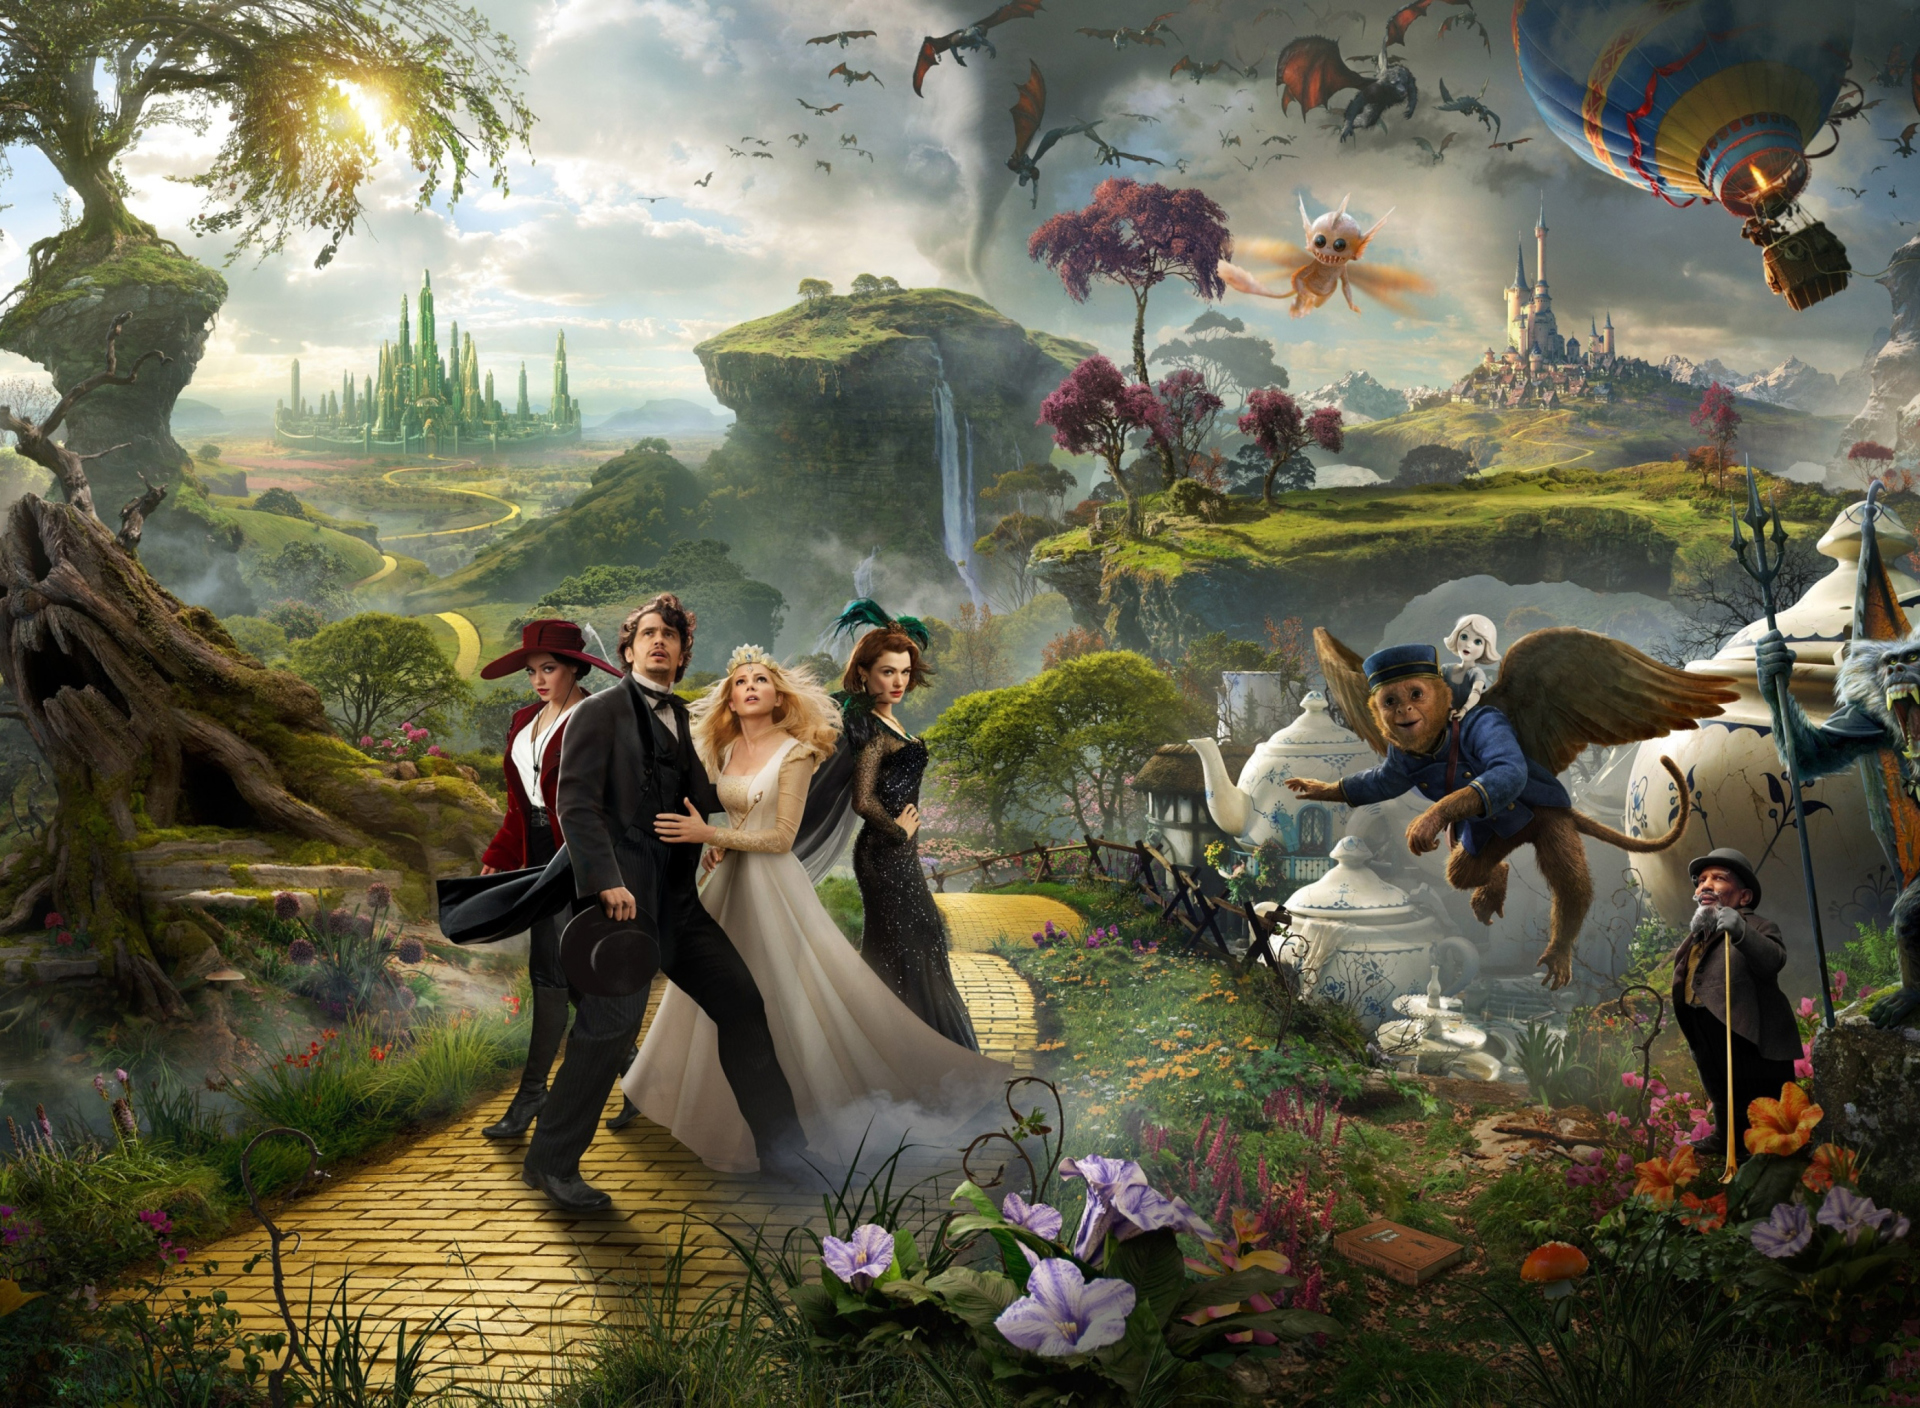 Das Oz The Great And Powerful 2013 Movie Wallpaper 1920x1408